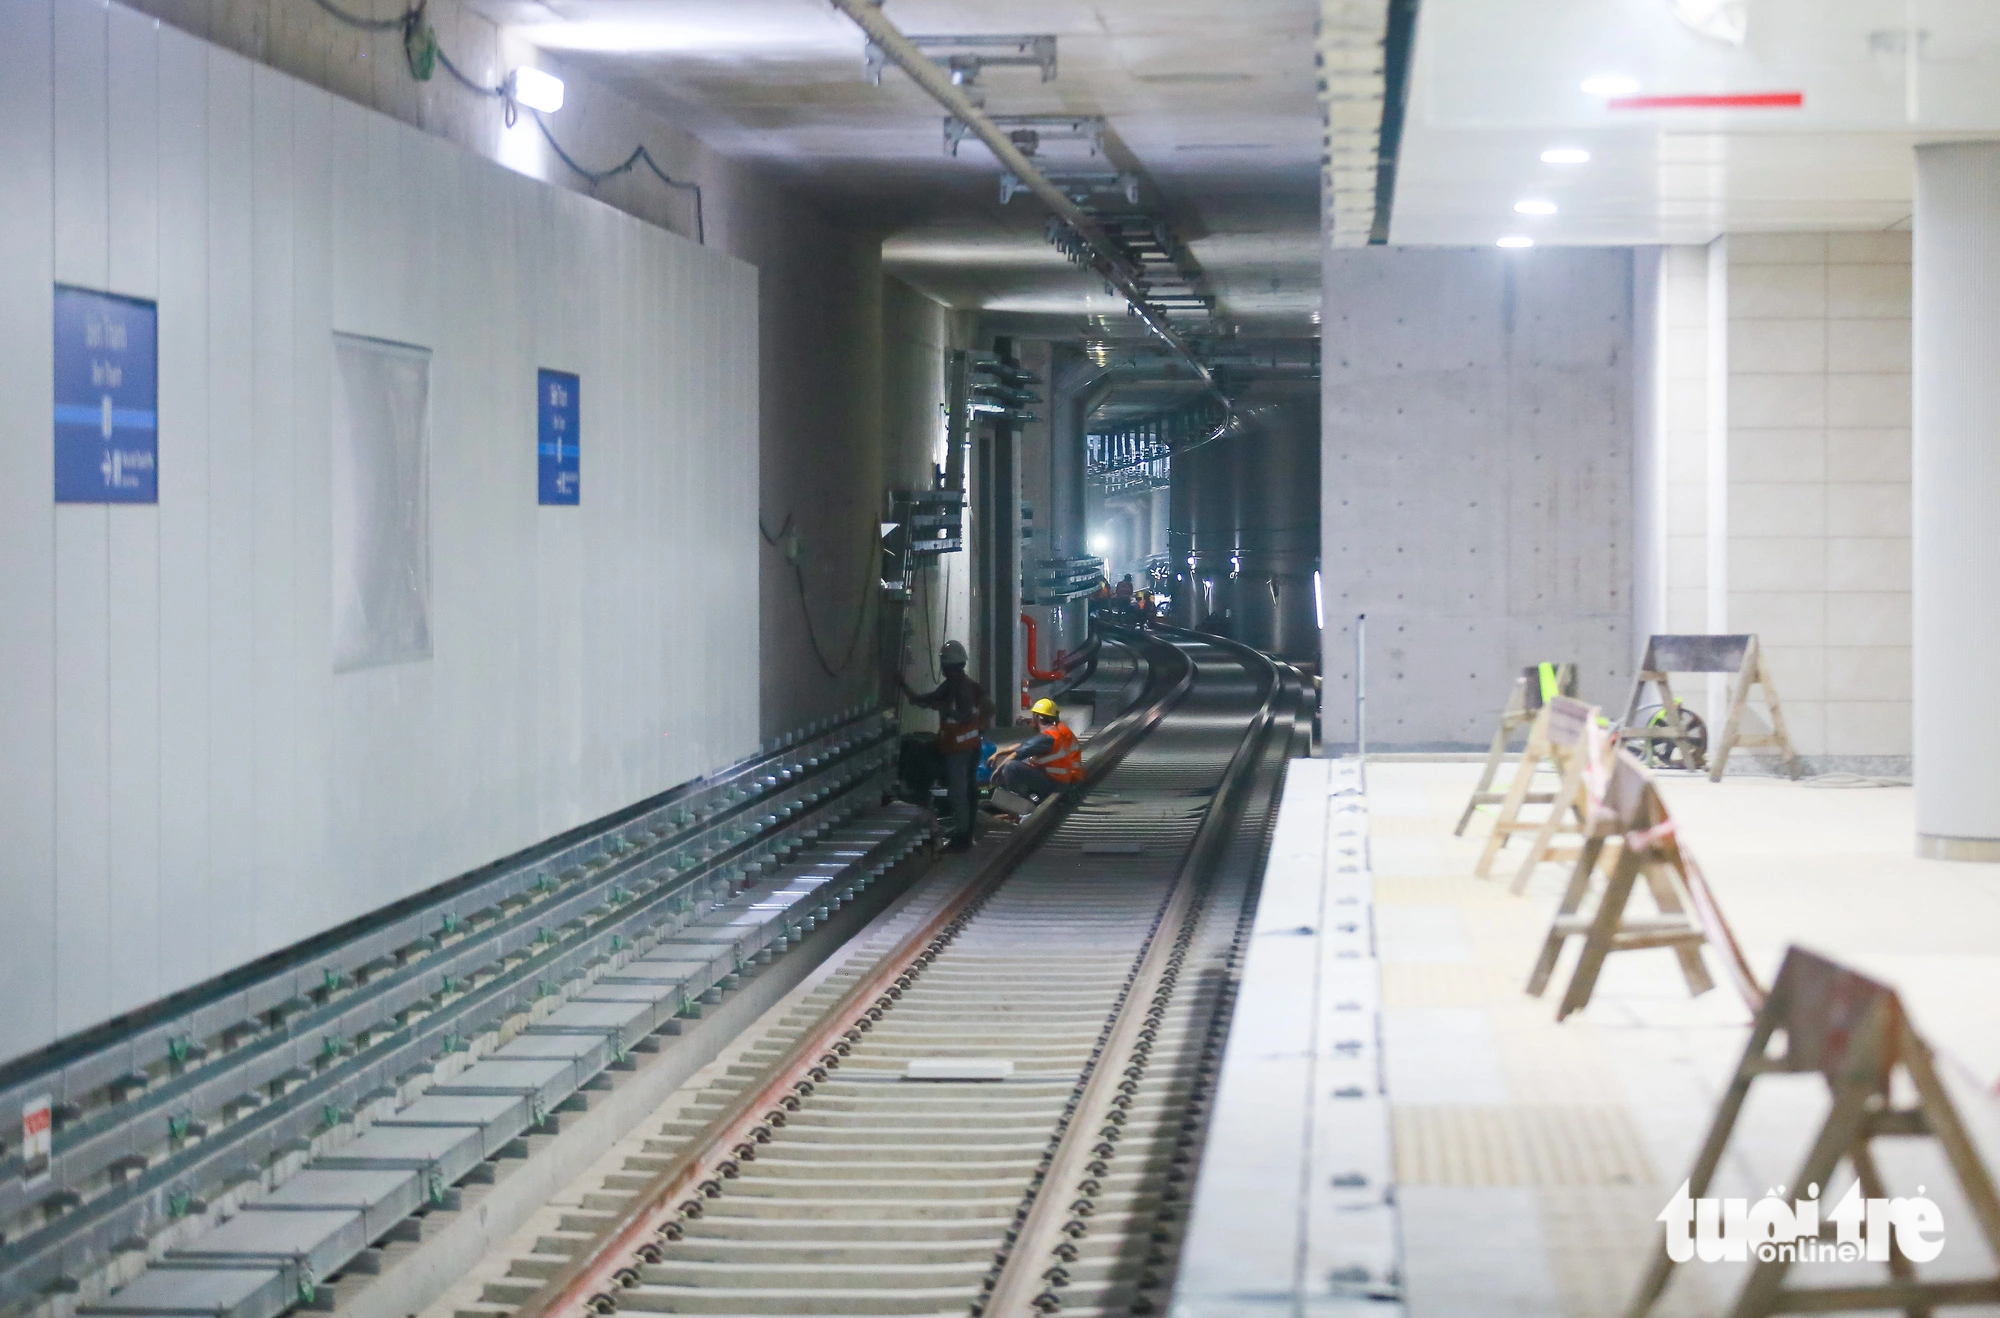 A track measures over 600 meters in length and 1.4 meters in width, establishing a connection between the Ben Thanh Station and  Opera House Station, which will service Ho Chi Minh City’s Metro Line No. 1. Photo: Chau Tuan / Tuoi Tre